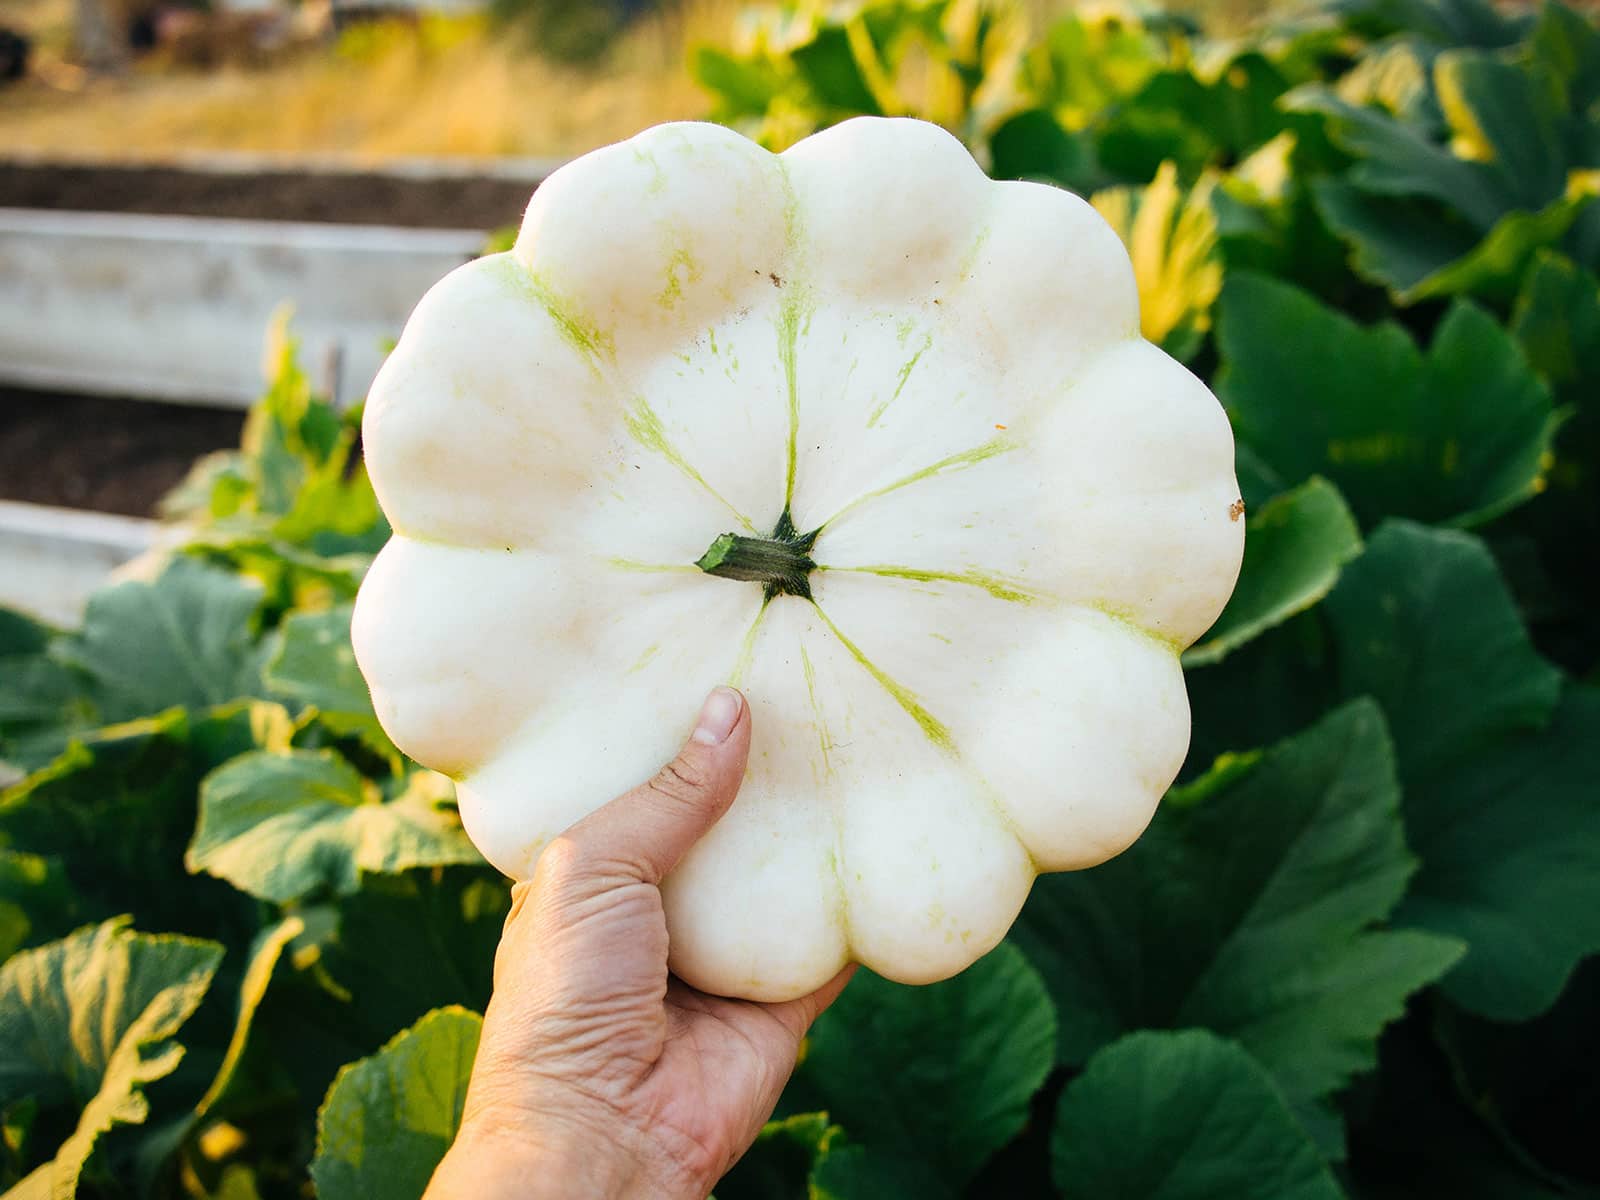 Hand holding a white pattypan squash in a vegetable garden